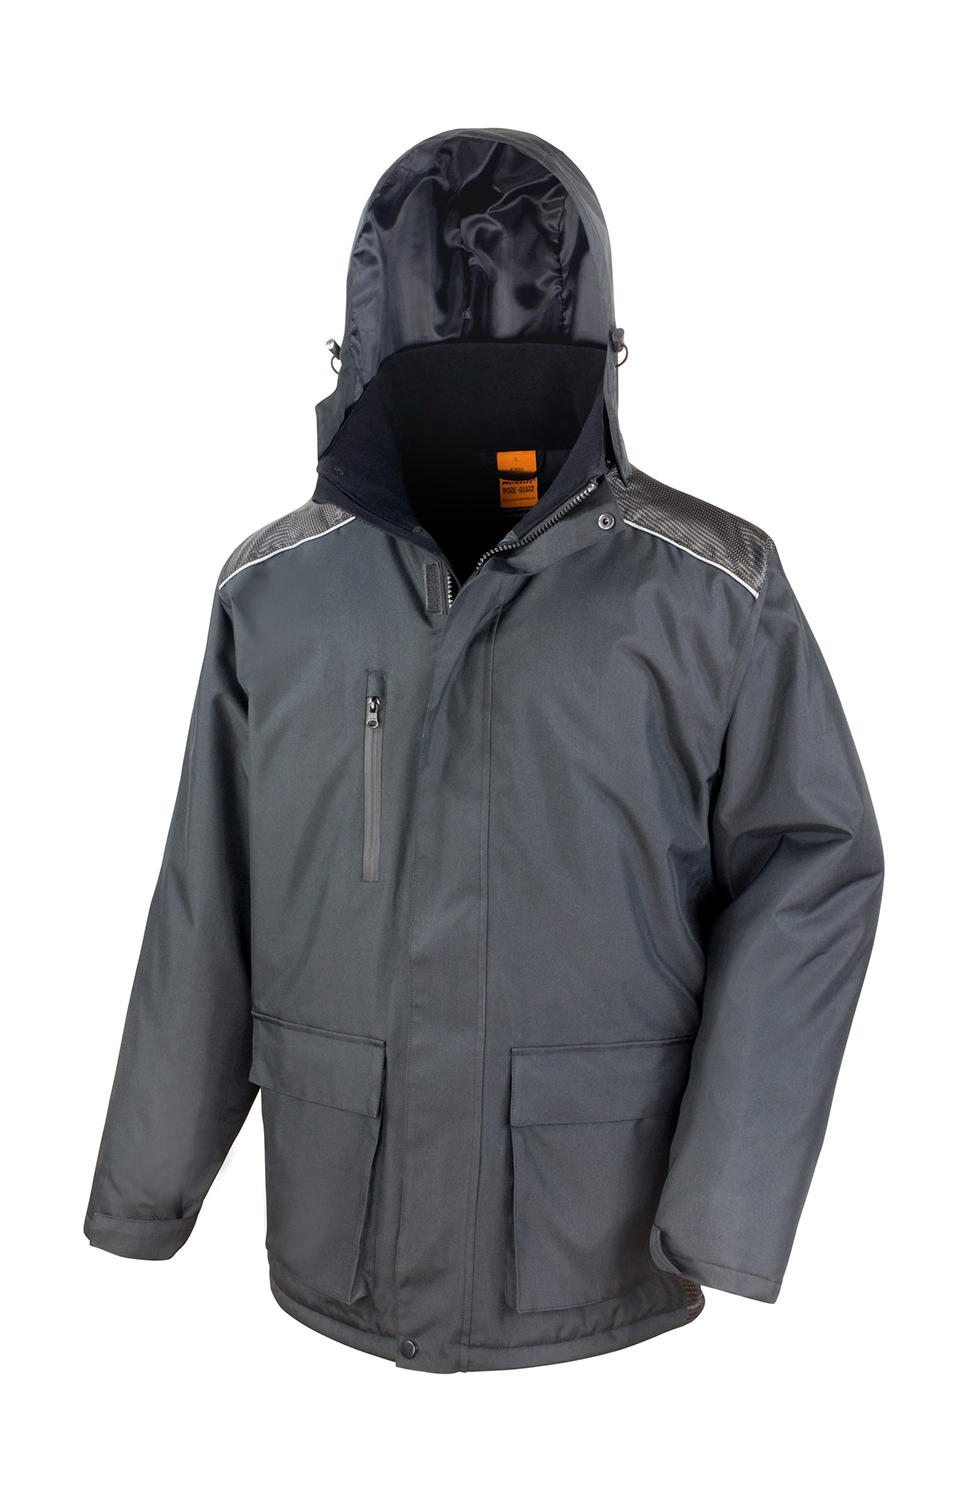  Work-Guard Vostex Long Coat in Farbe Black